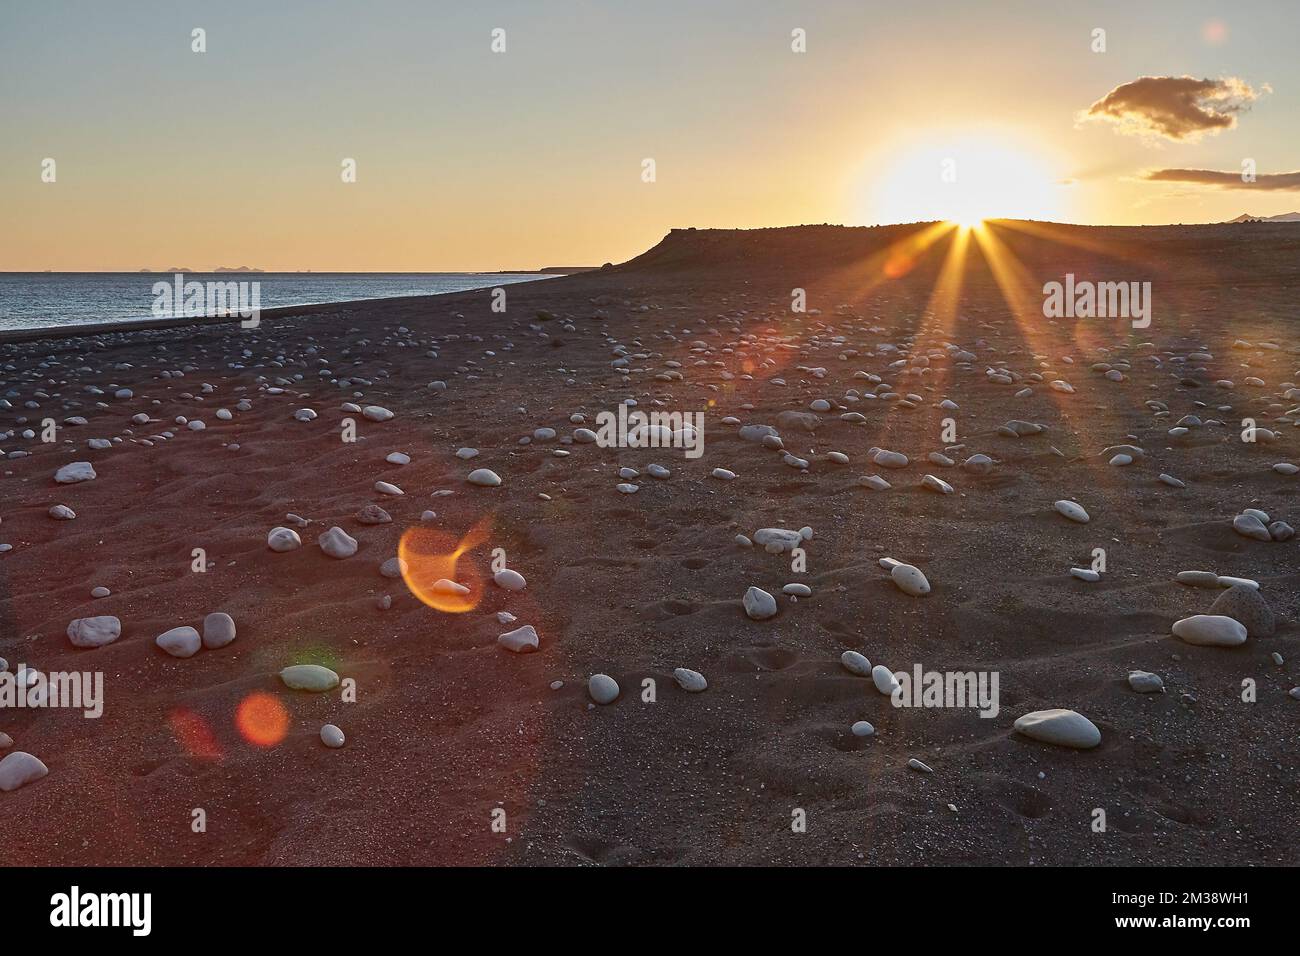 Iceland landscape black sand beach with stones and sunset flare Stock Photo